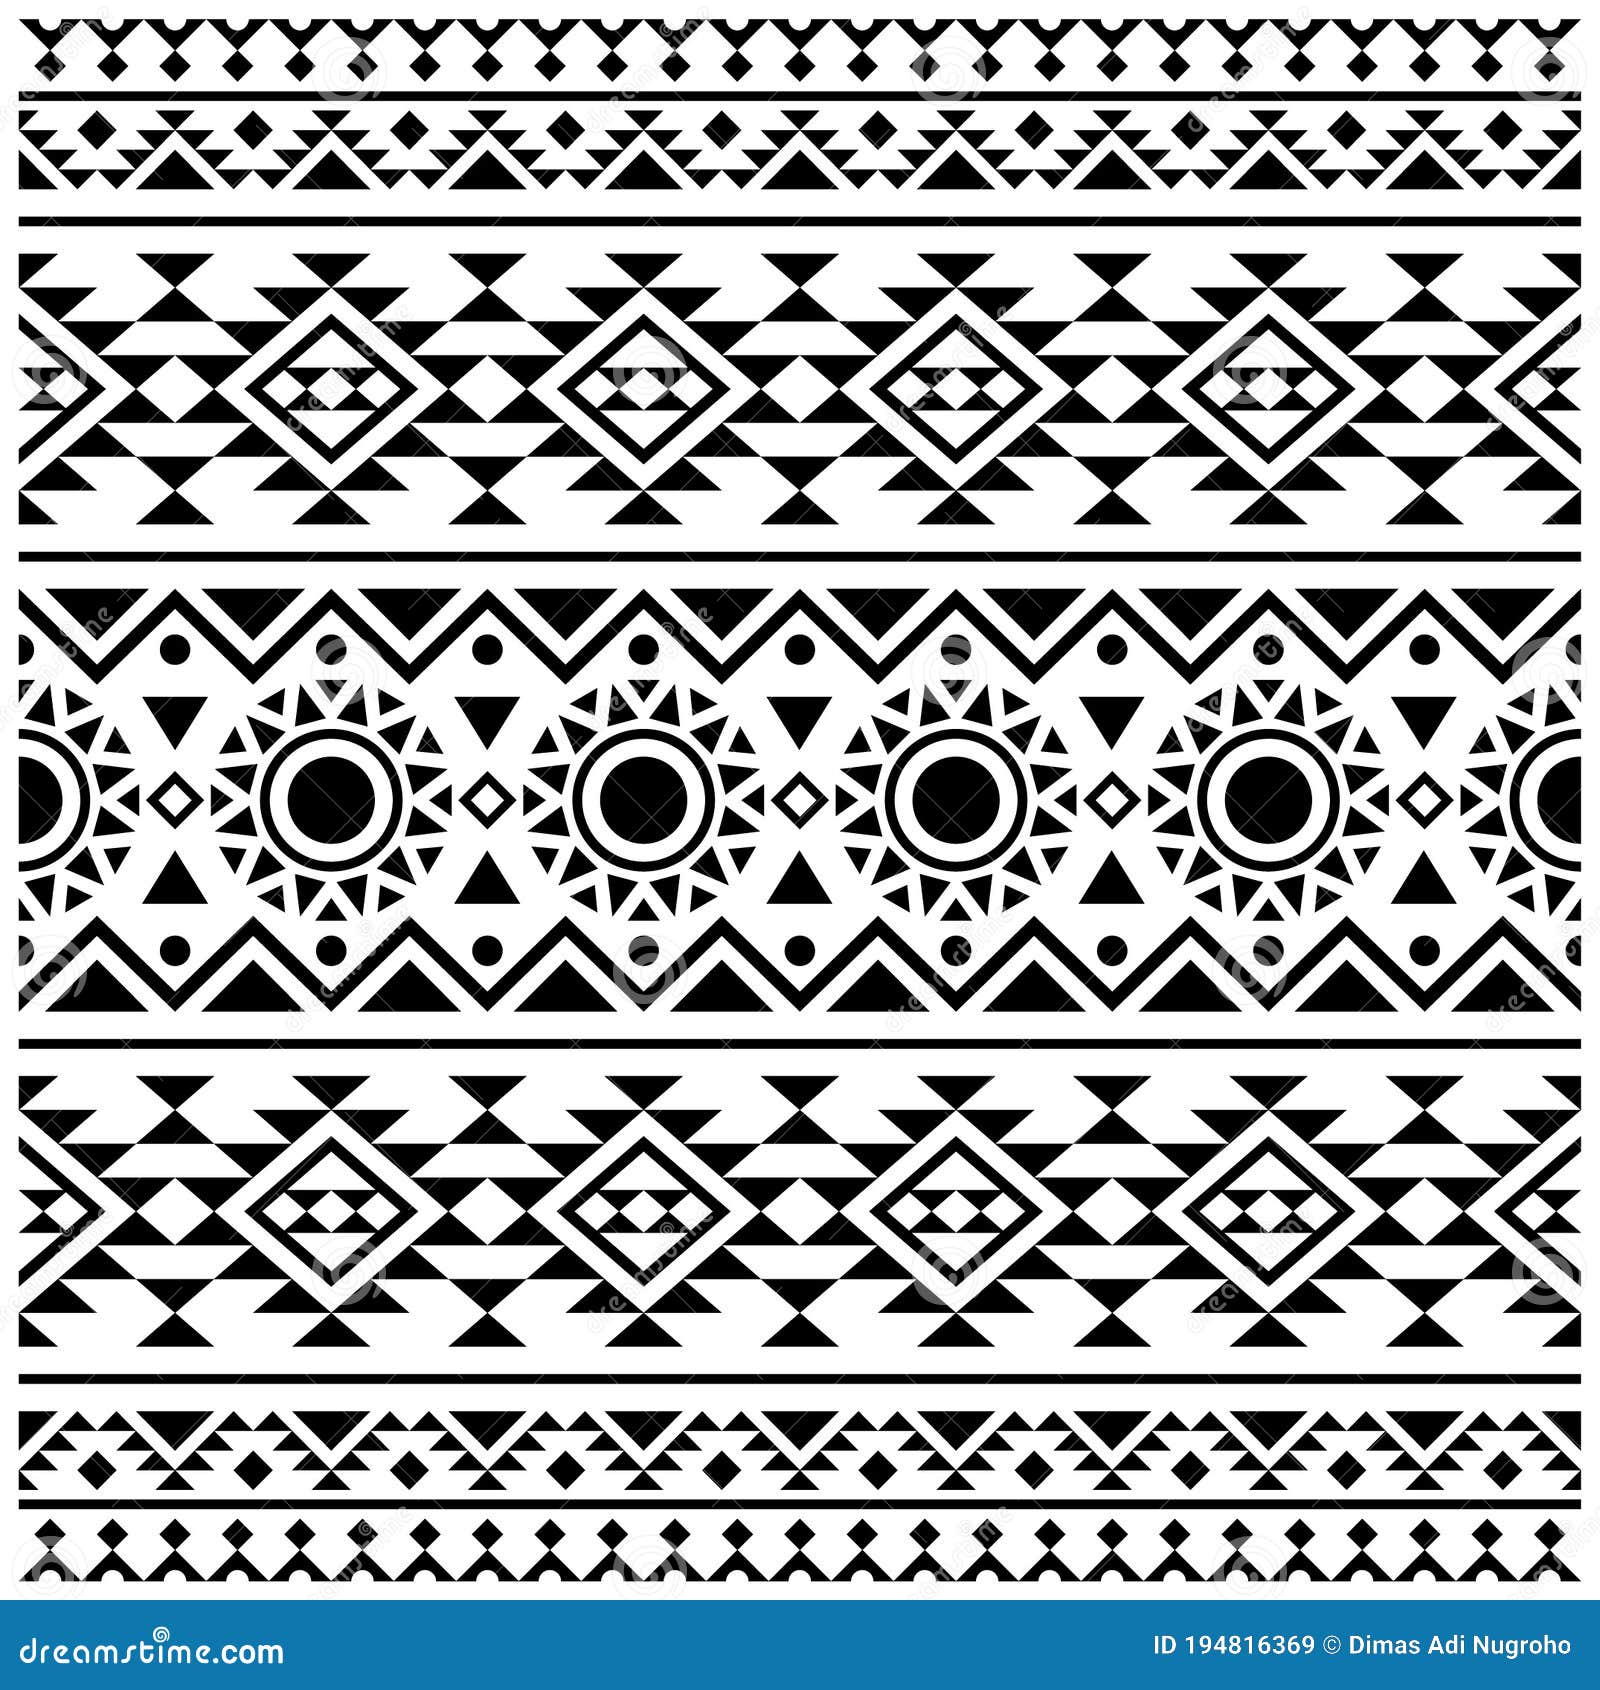 Tribal Seamless Pattern Texture Background Design Vector in Black White ...